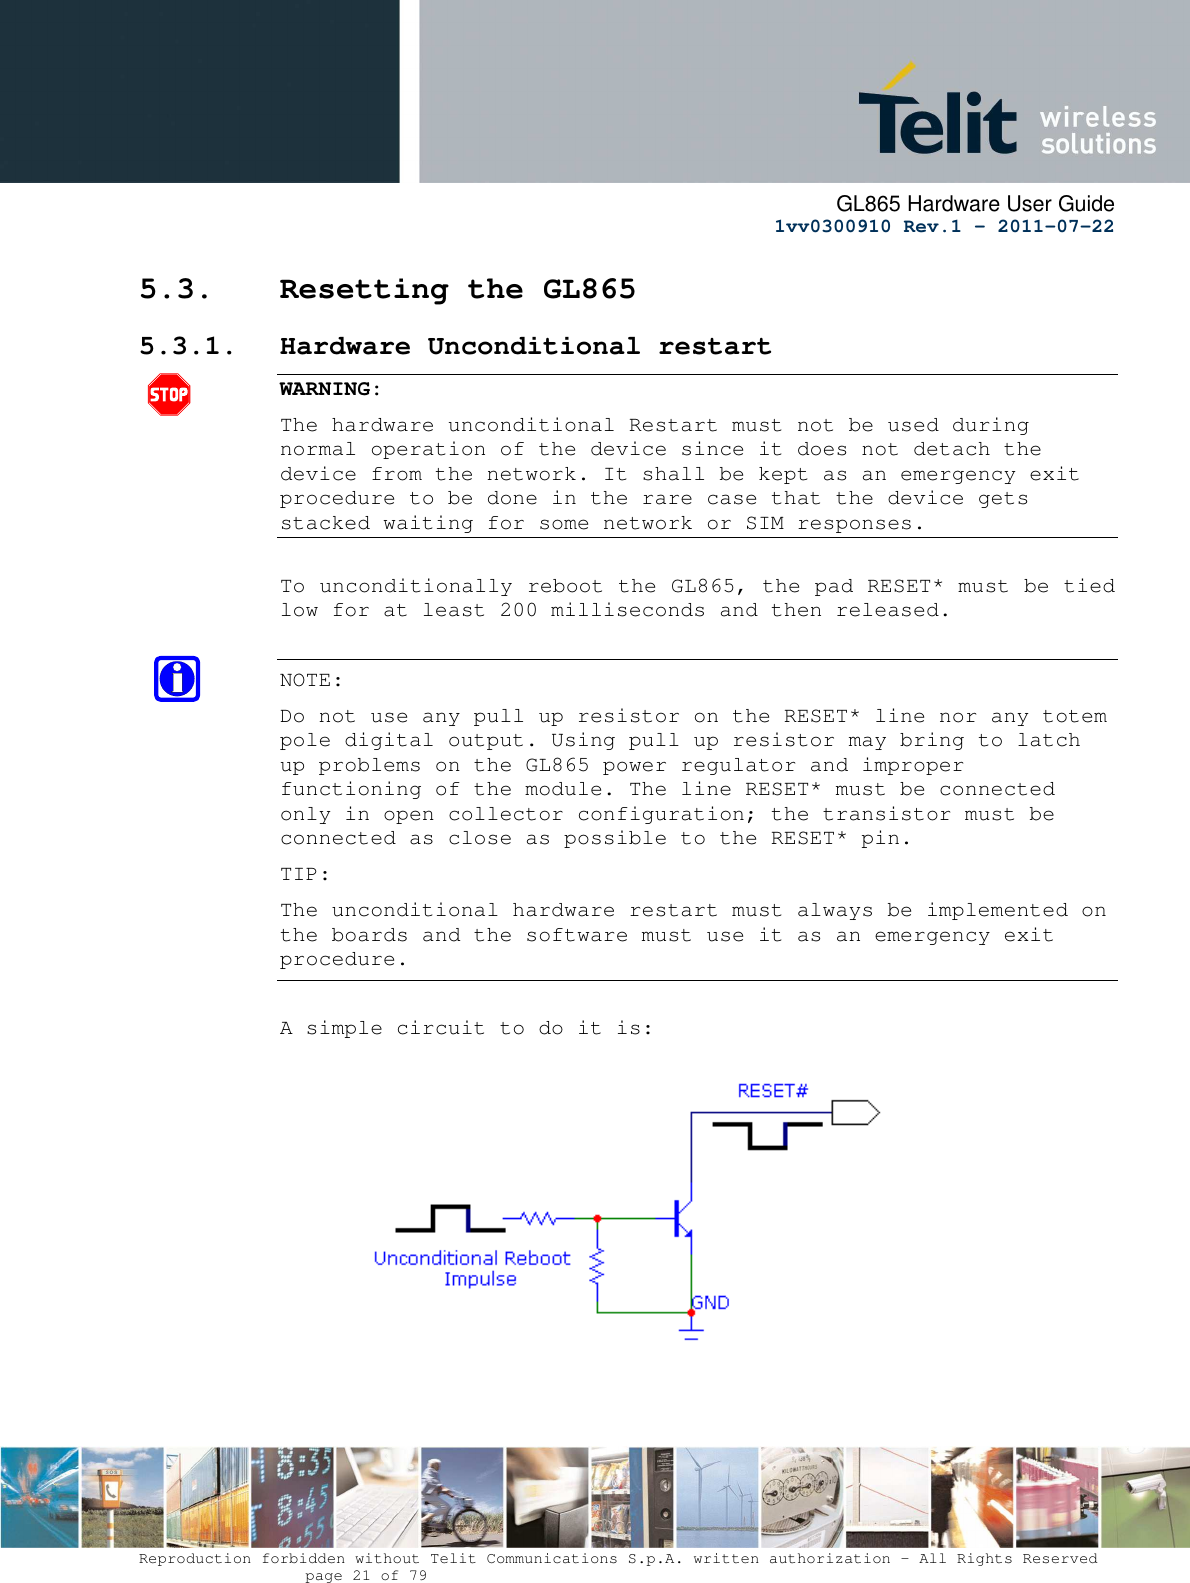      GL865 Hardware User Guide     1vv0300910 Rev.1 – 2011-07-22       Reproduction forbidden without Telit Communications S.p.A. written authorization - All Rights Reserved    page 21 of 79  5.3. Resetting the GL865 5.3.1. Hardware Unconditional restart  WARNING: The hardware unconditional Restart must not be used during normal operation of the device since it does not detach the device from the network. It shall be kept as an emergency exit procedure to be done in the rare case that the device gets stacked waiting for some network or SIM responses.  To unconditionally reboot the GL865, the pad RESET* must be tied low for at least 200 milliseconds and then released.  NOTE:  Do not use any pull up resistor on the RESET* line nor any totem pole digital output. Using pull up resistor may bring to latch up problems on the GL865 power regulator and improper functioning of the module. The line RESET* must be connected only in open collector configuration; the transistor must be connected as close as possible to the RESET* pin. TIP: The unconditional hardware restart must always be implemented on the boards and the software must use it as an emergency exit procedure.  A simple circuit to do it is:    